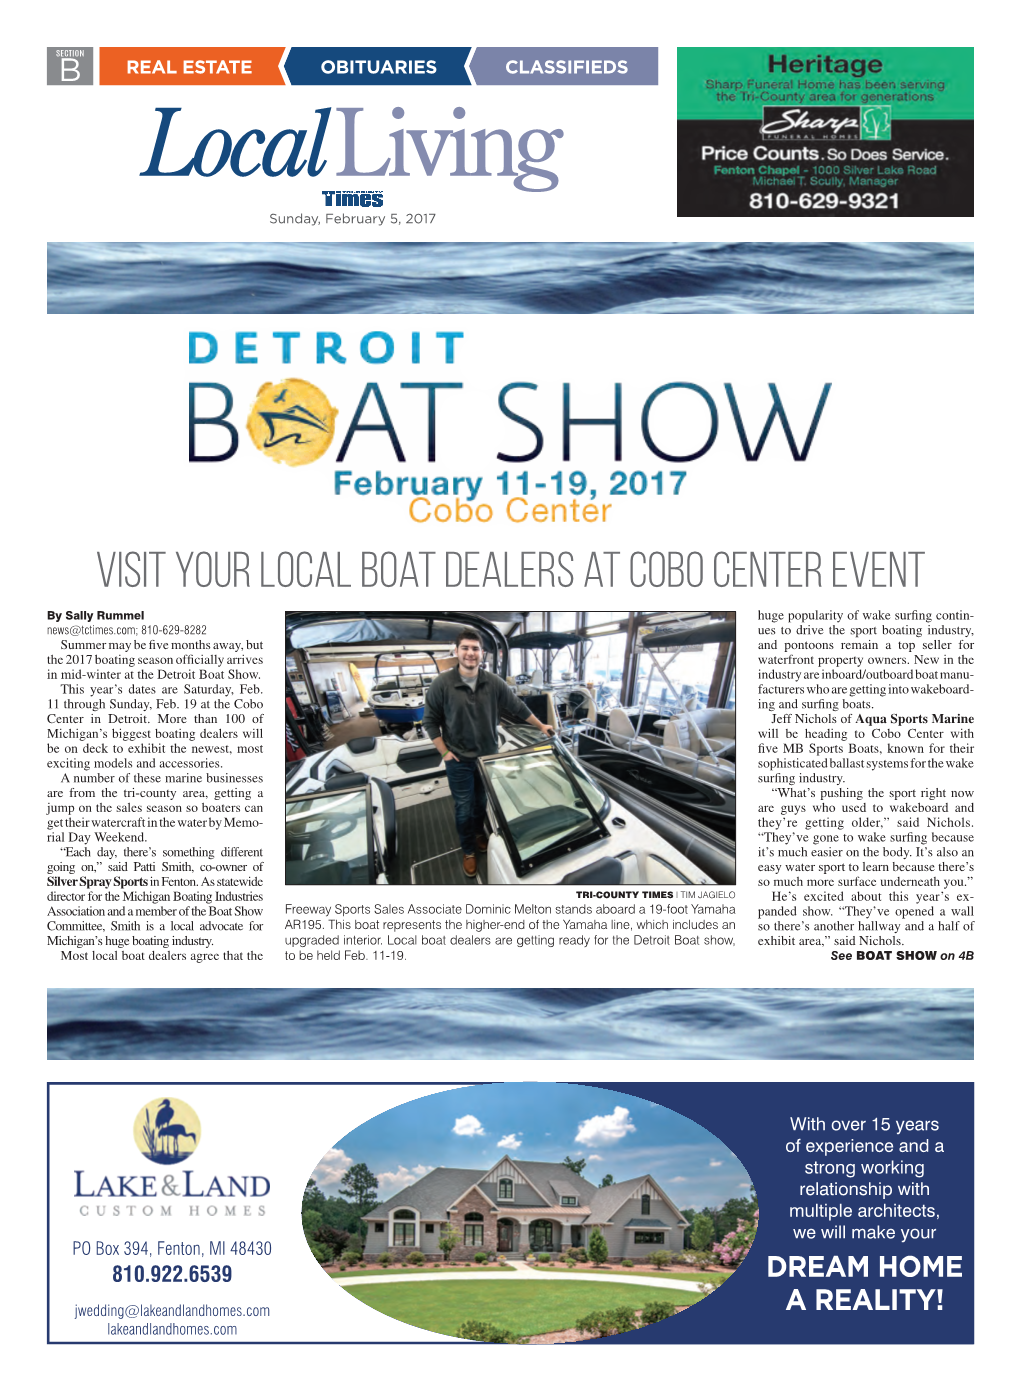 Visit Your Local Boat Dealers at Cobo Center Event